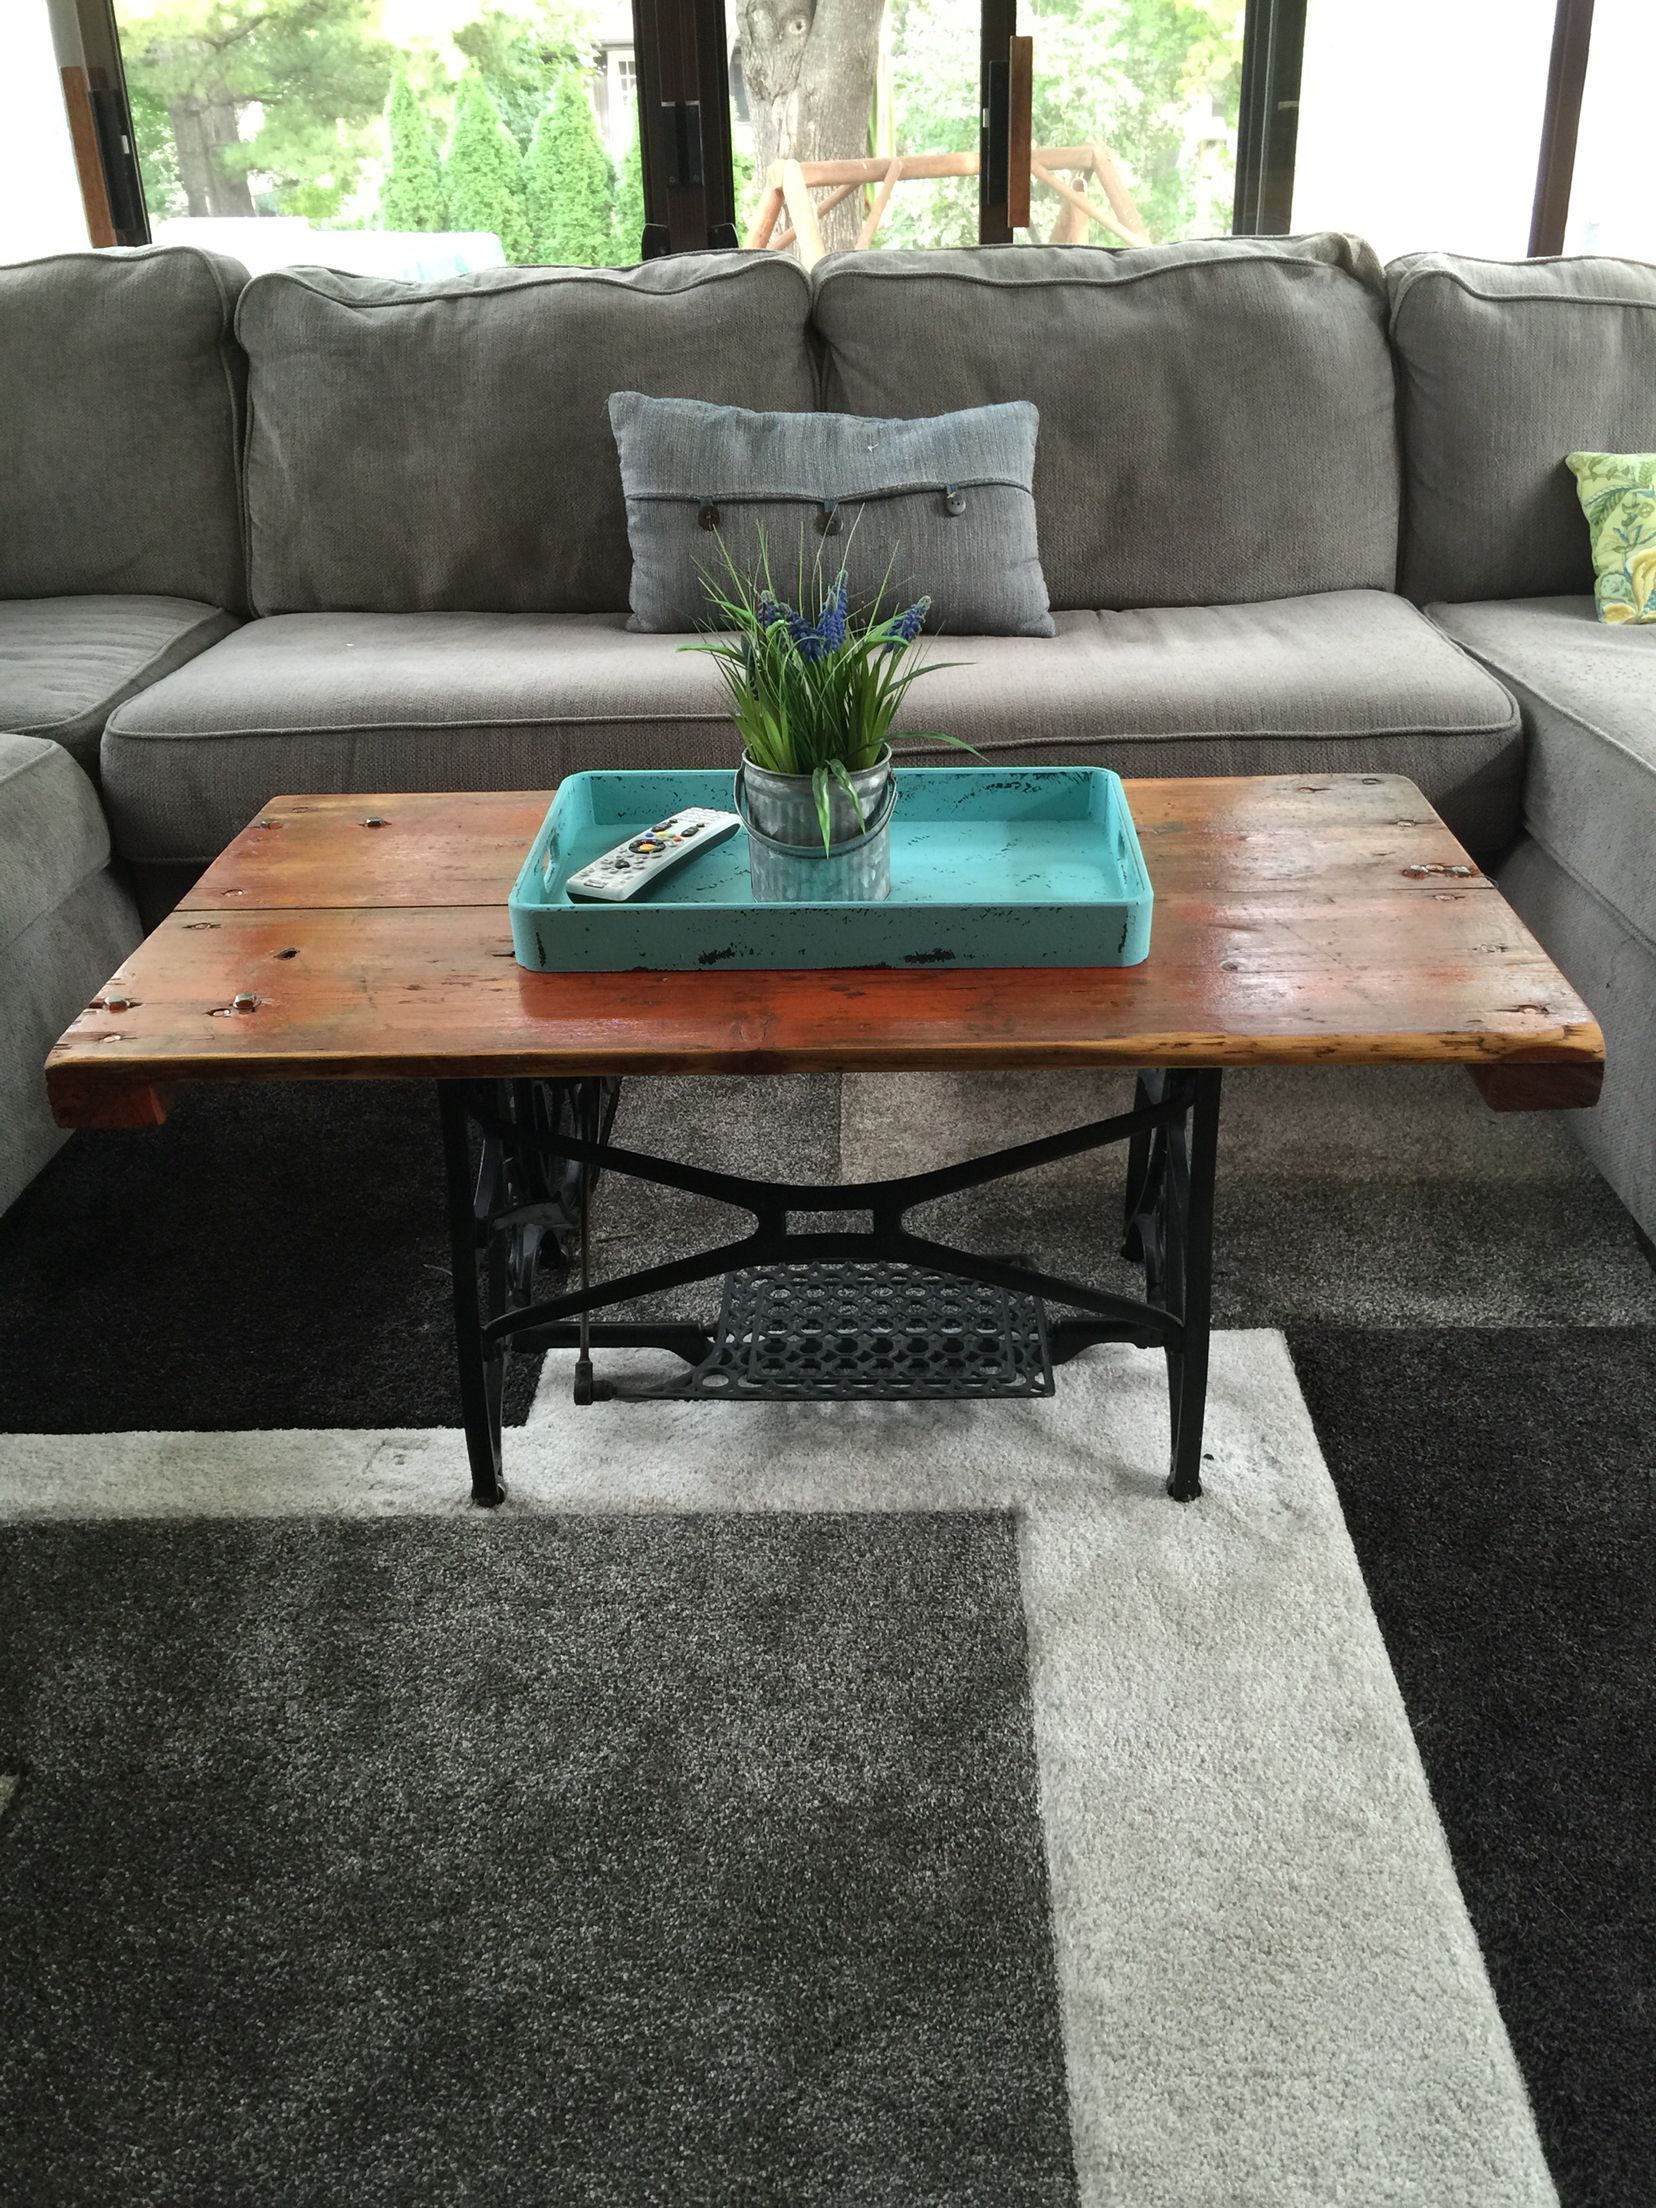 Coffee Table Made From Barn Door And Antique Sewing Machine Base Intended For Coffee Tables With Sliding Barn Doors (Gallery 15 of 20)